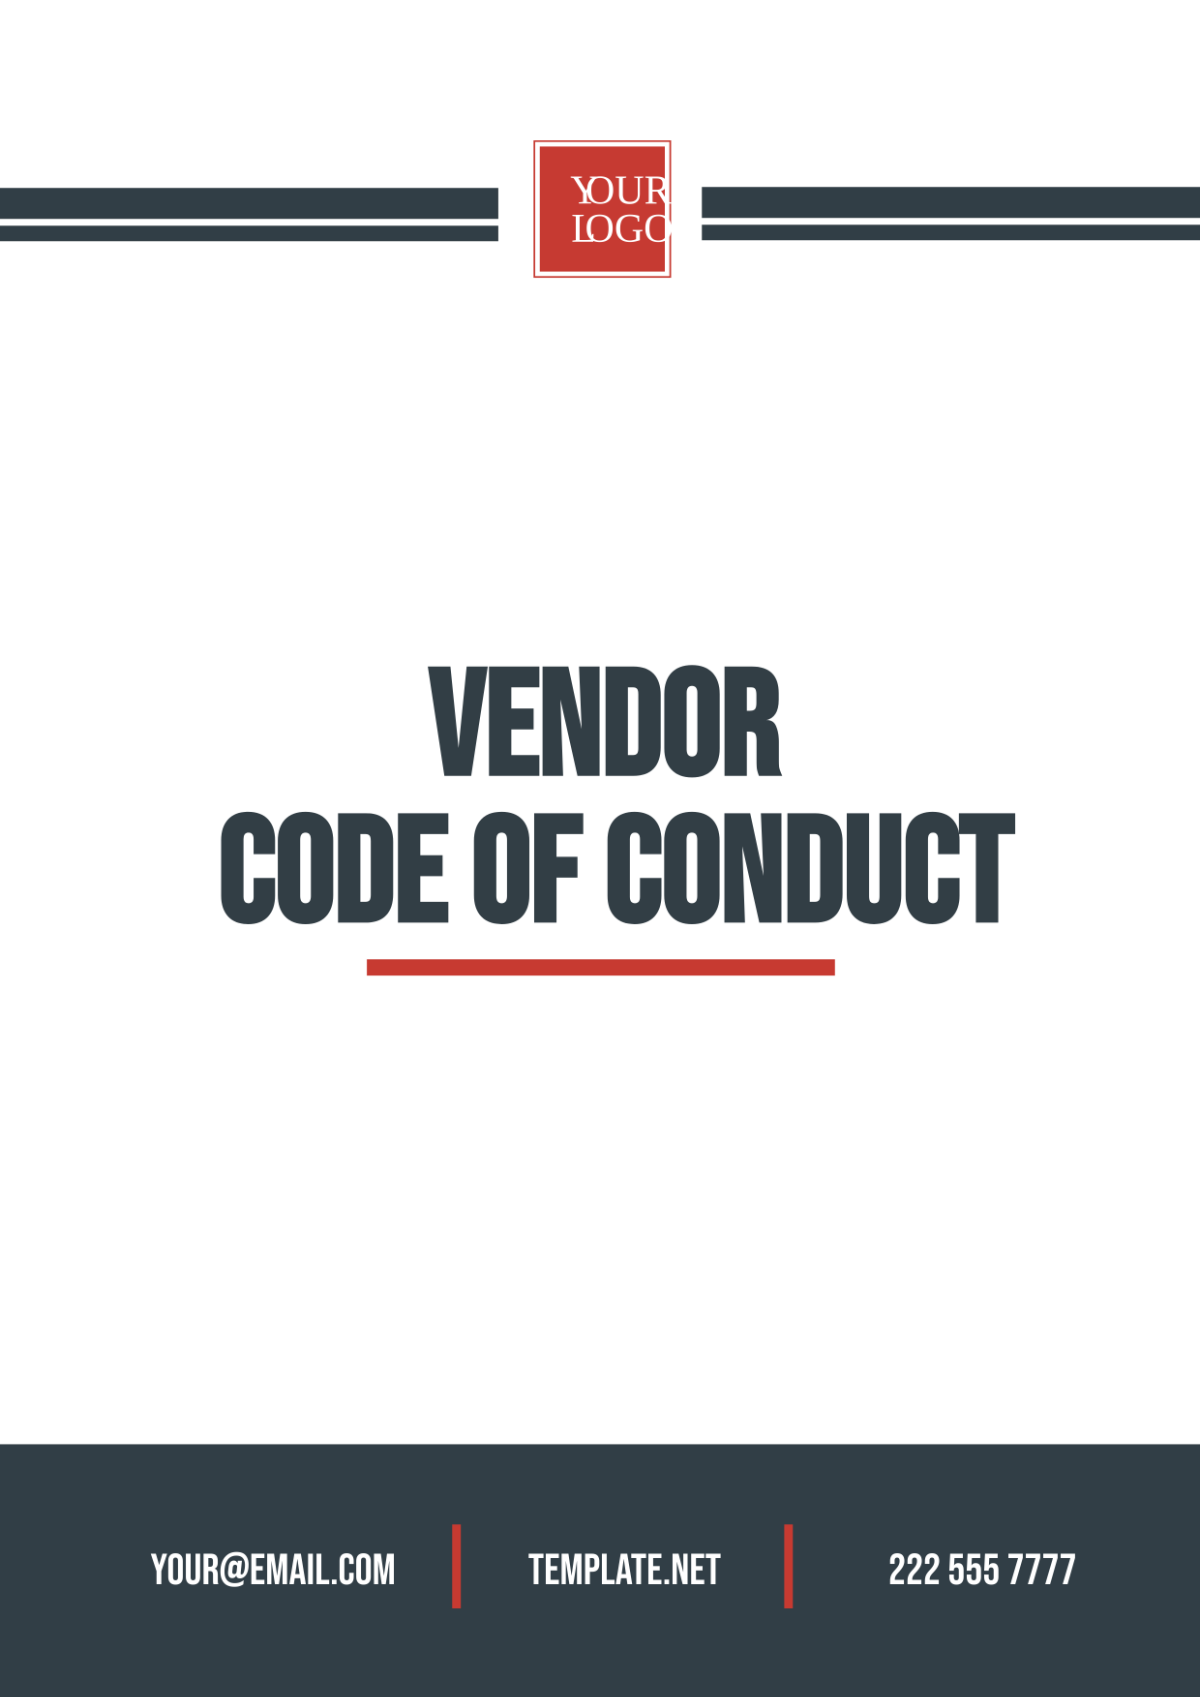 Vendor Code of Conduct Template